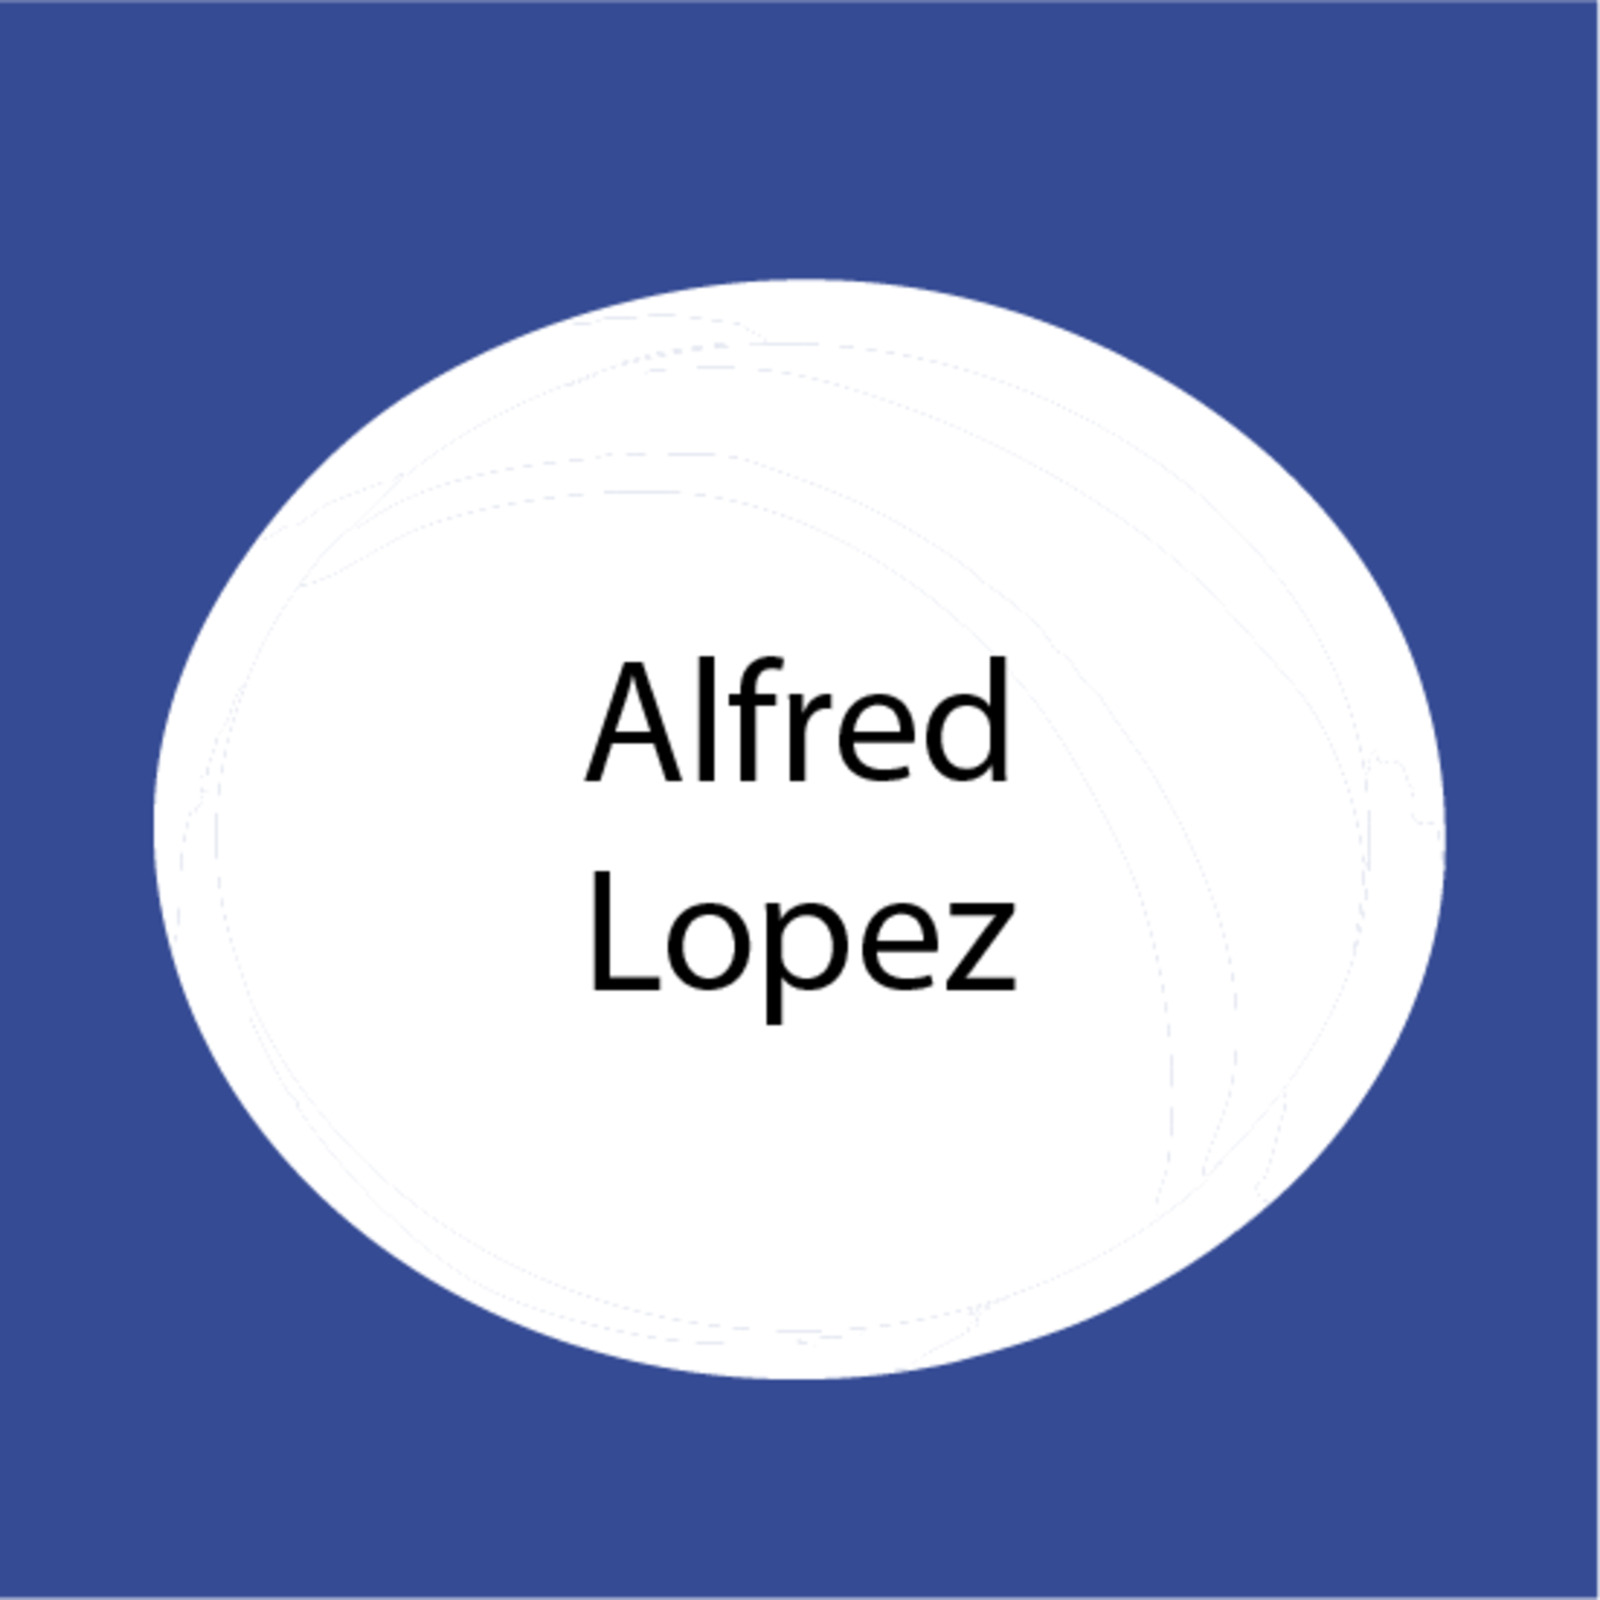 Alfred Lopez